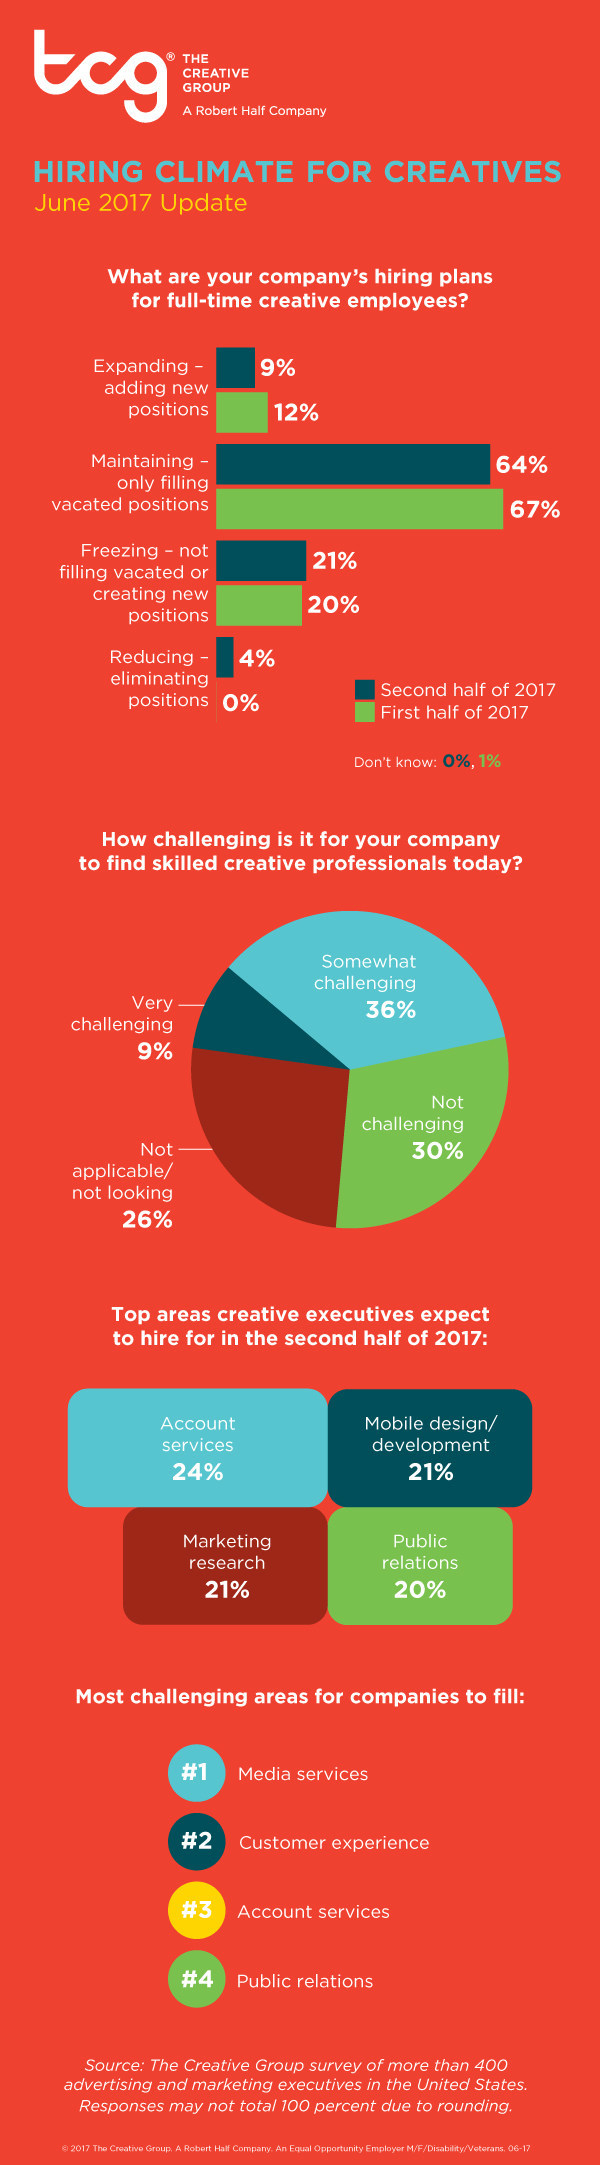 Research from The Creative Group reveals U.S. advertising and marketing executives' hiring plans for second half of 2017